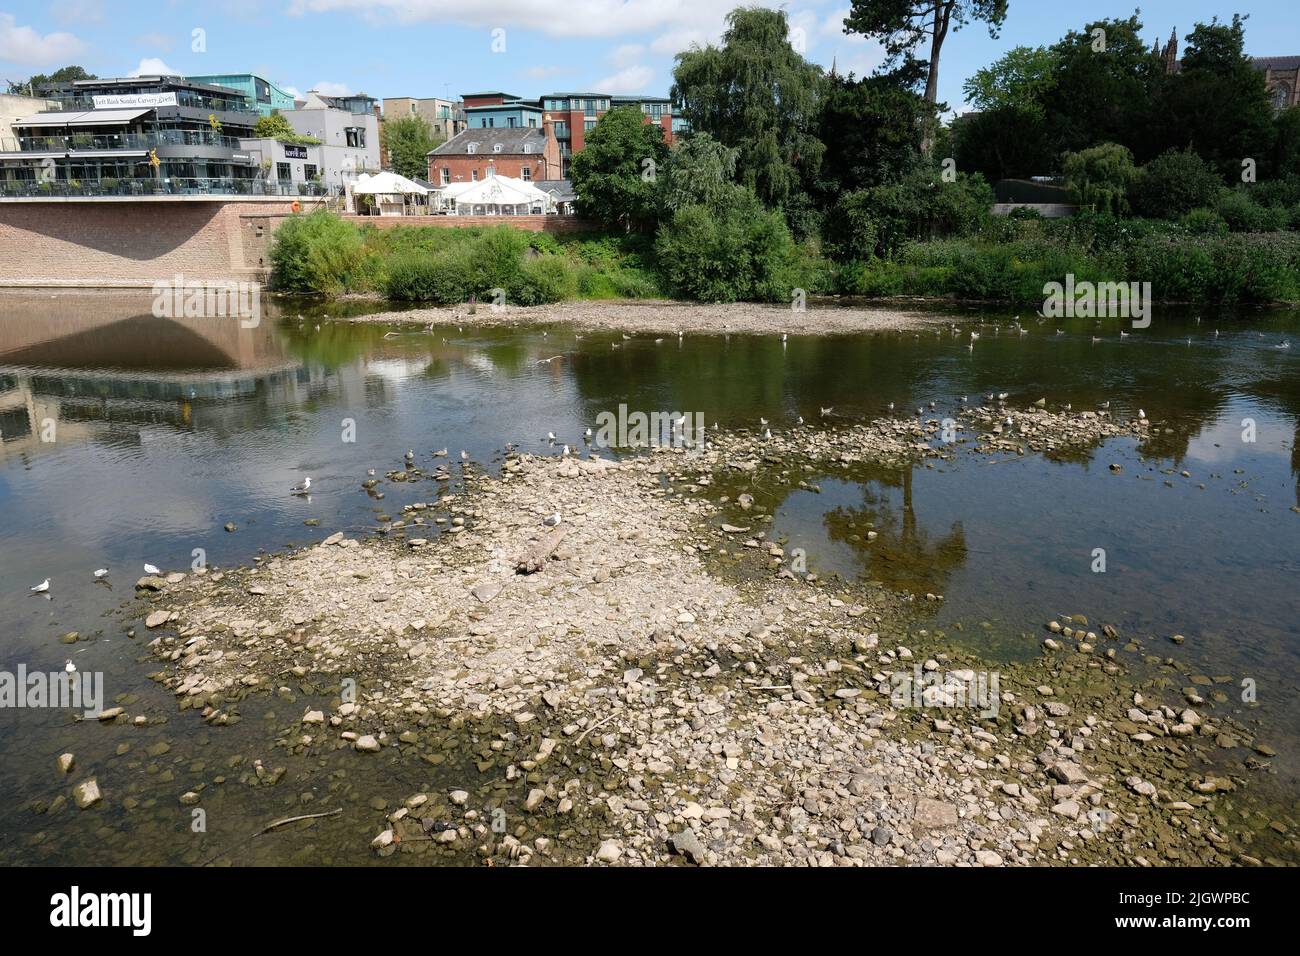 River Wye, Hereford, Herefordshire, UK – Wednesday 13th July 2022 – The river level on the River Wye as it passes through the city of Hereford is very low exposing parts of the riverbed. The Environment Agency river level gauge in the city recorded a value of less than 10cm today. The river water temperature was recorded at 20c yesterday posing a threat to fish in the river.  The local weather forecast shows no rain in the next week during a prolonged hot dry spell. Photo Steven May / Alamy Live News Stock Photo